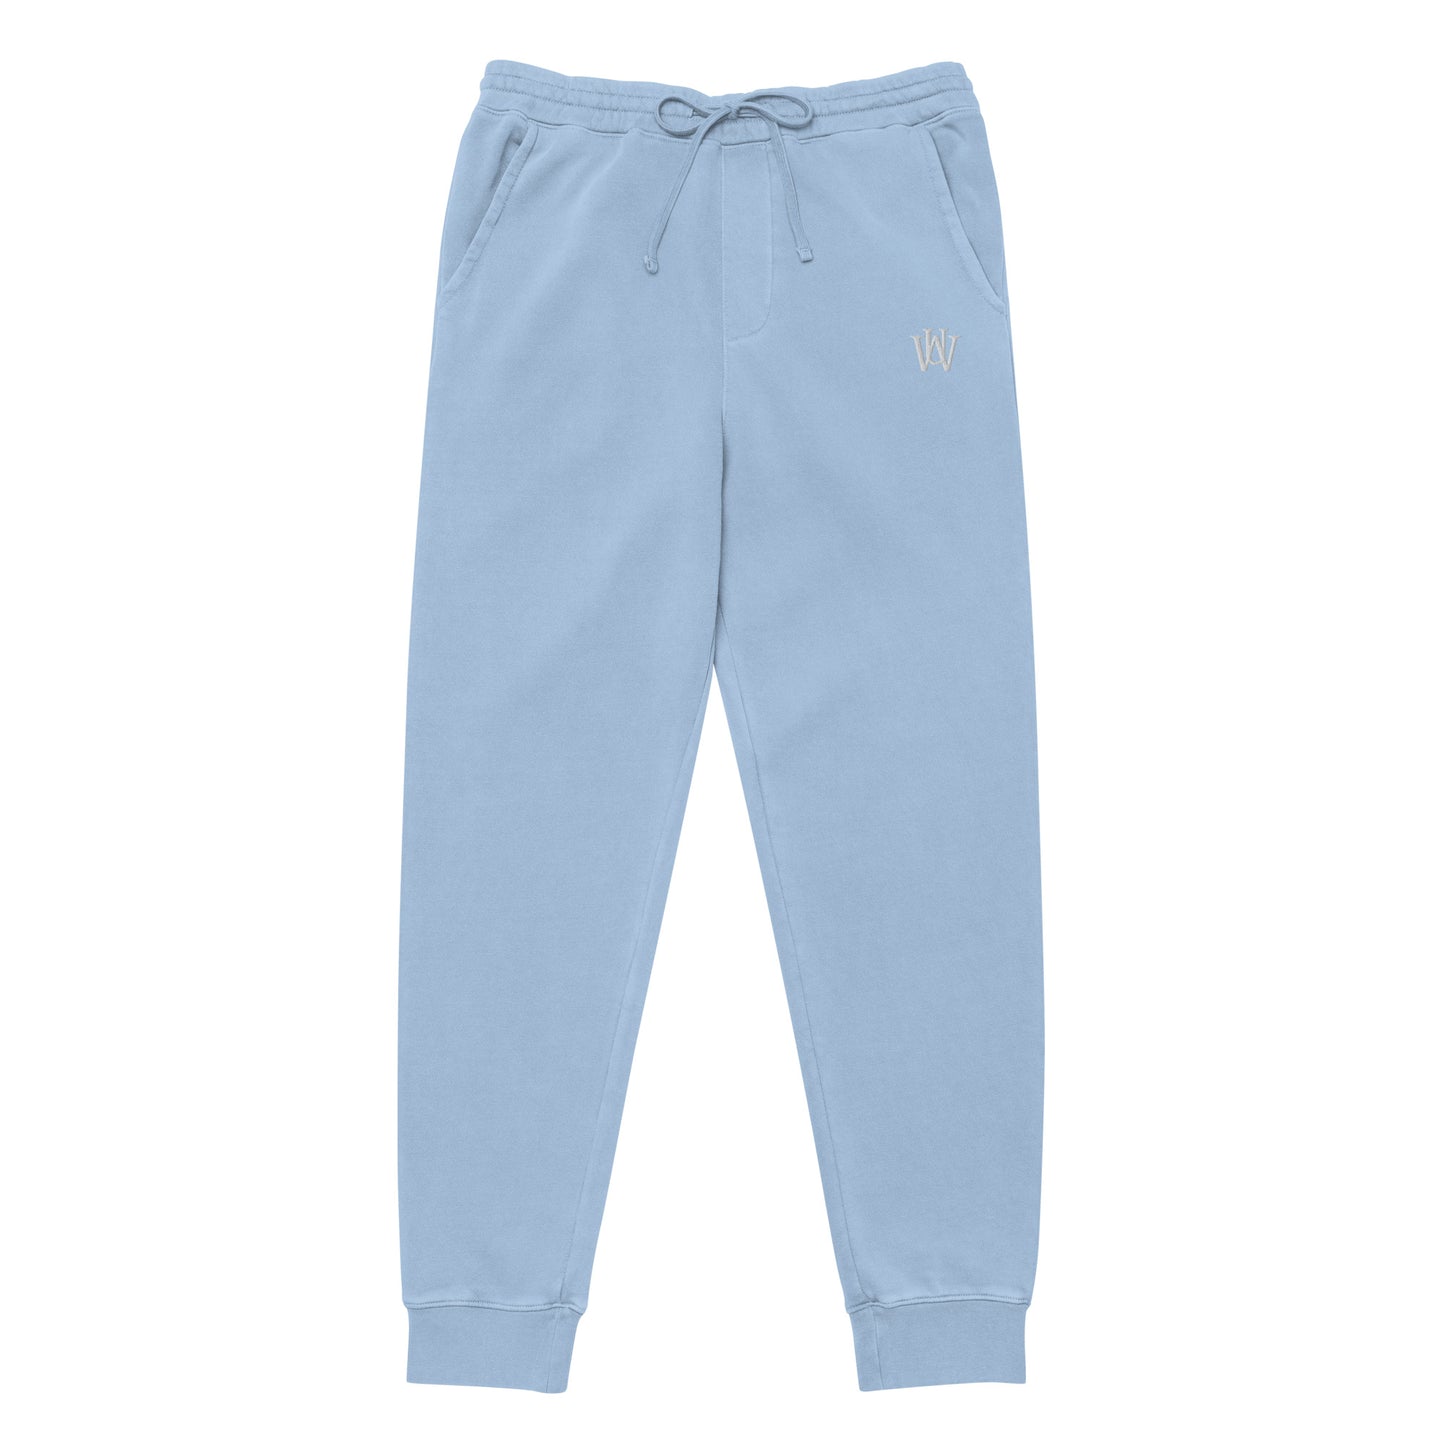 WAKE UP Pigment-Dyed Sweatpants (Embroidery)